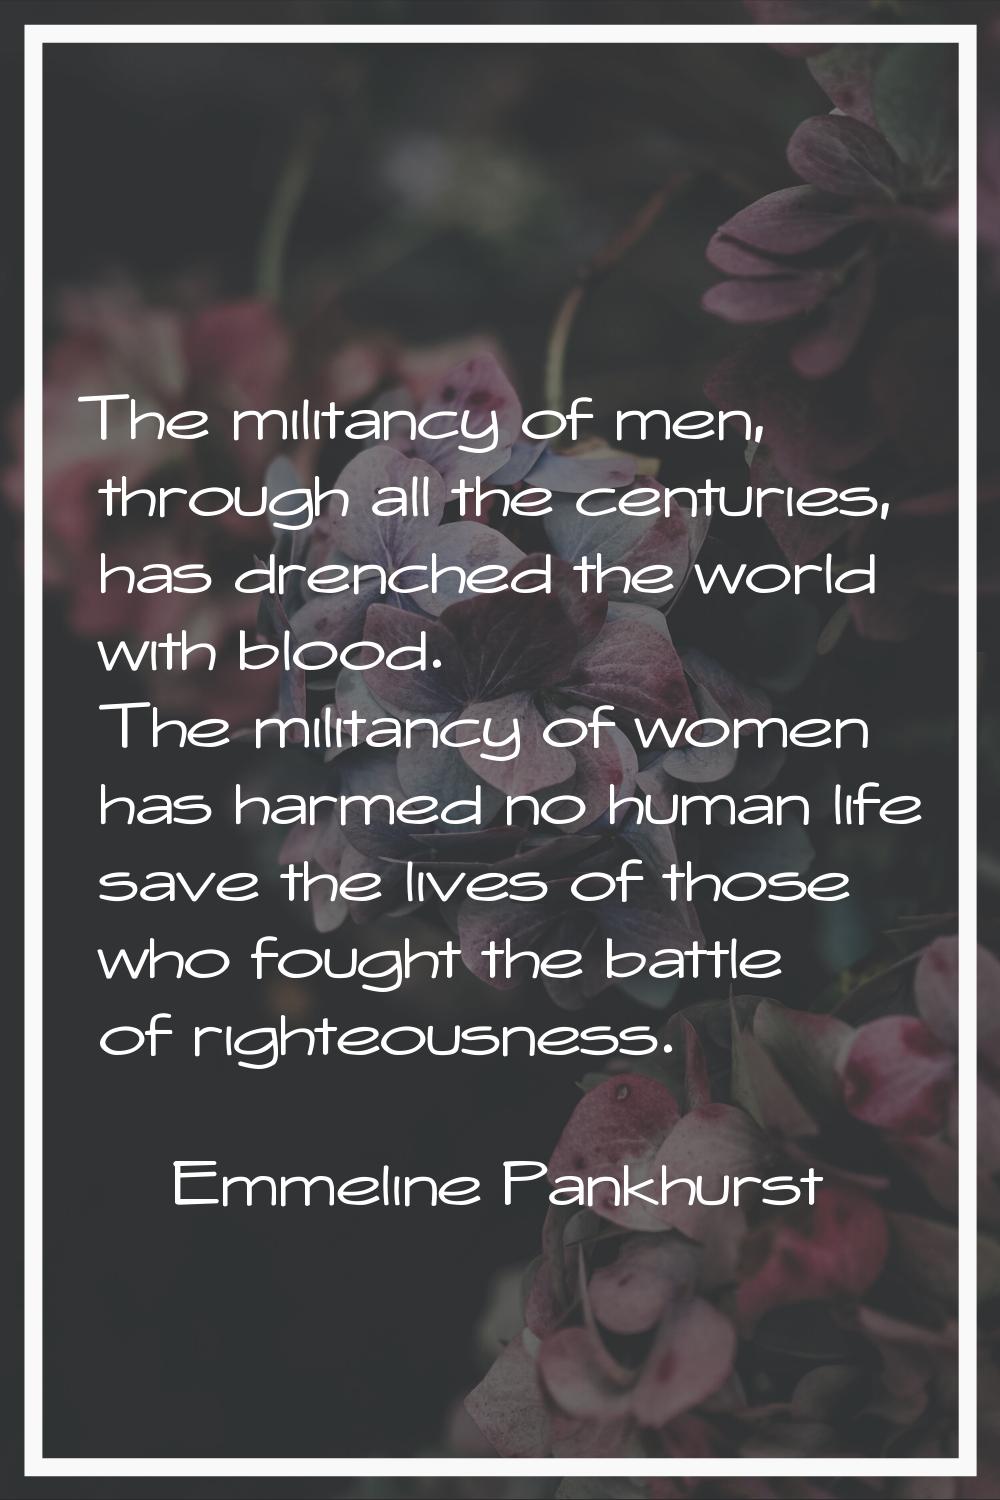 The militancy of men, through all the centuries, has drenched the world with blood. The militancy o